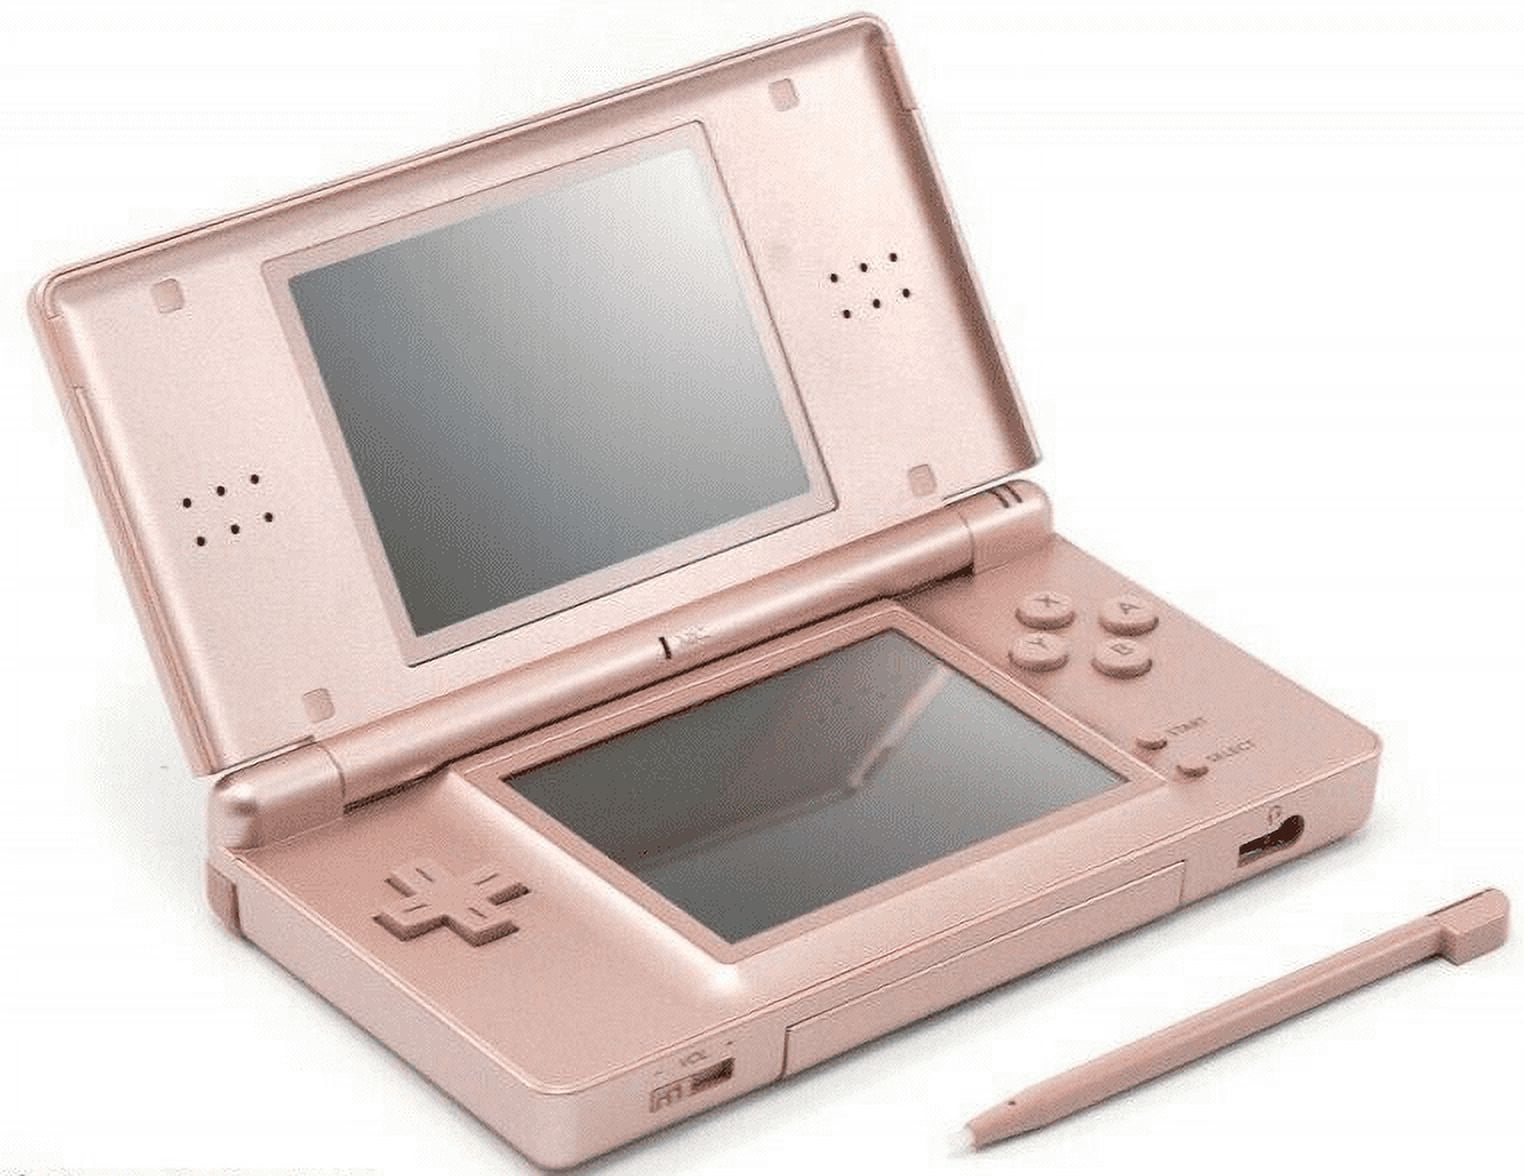 Authentic Nintendo DS Lite Console Metallic Rose with Stylus and Charger -  100% OEM